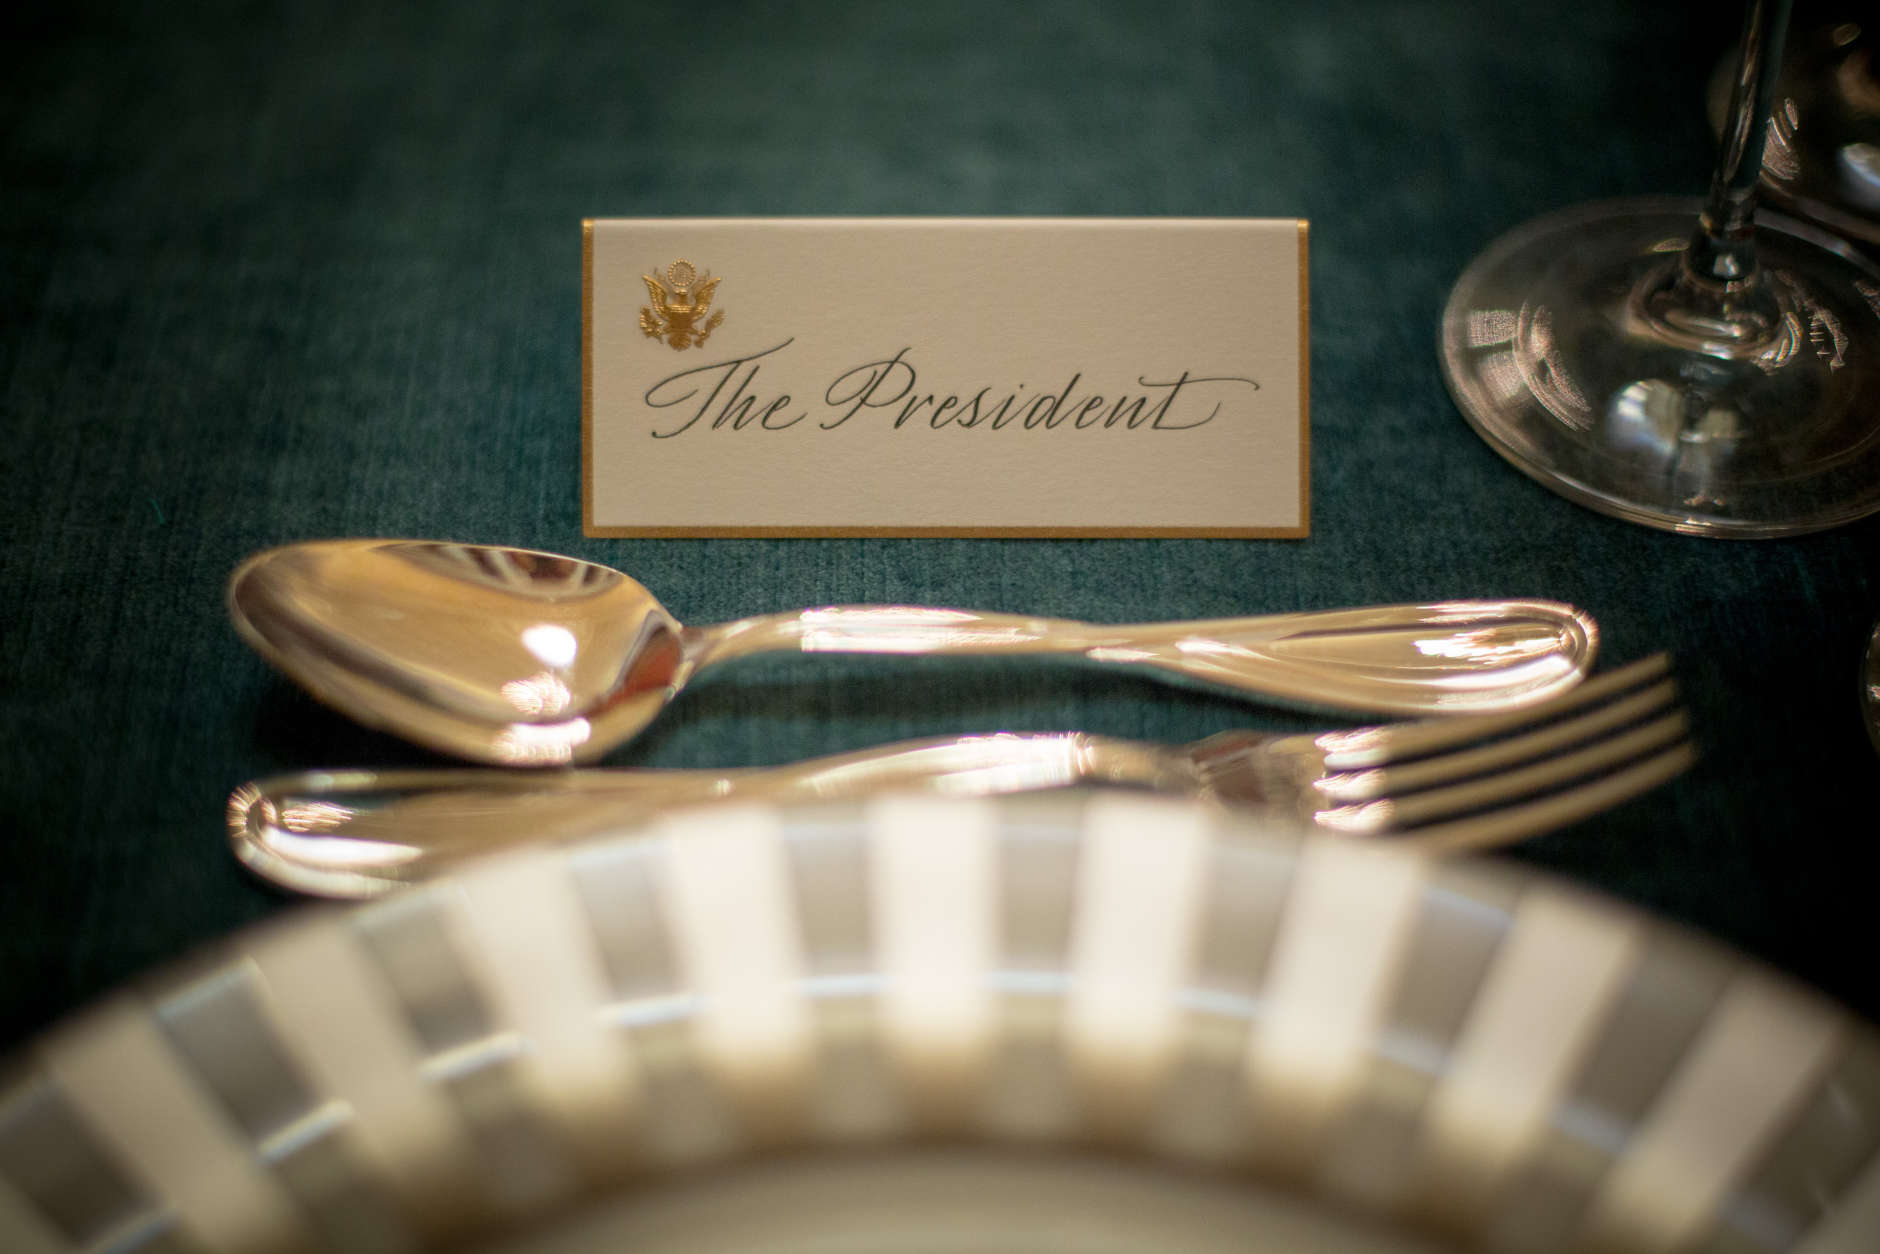 WASHINGTON, DC - JANUARY 21:  The place card for U.S. President Barack Obama sits ready for the Inaugural Luncheon in Statuary Hall on inauguration day at the U.S. Capitol building January 21, 2013 in Washington D.C. U.S. President Barack Obama, will be ceremonially sworn in for his second term today.  (Photo by Allison Shelley/Getty Images)